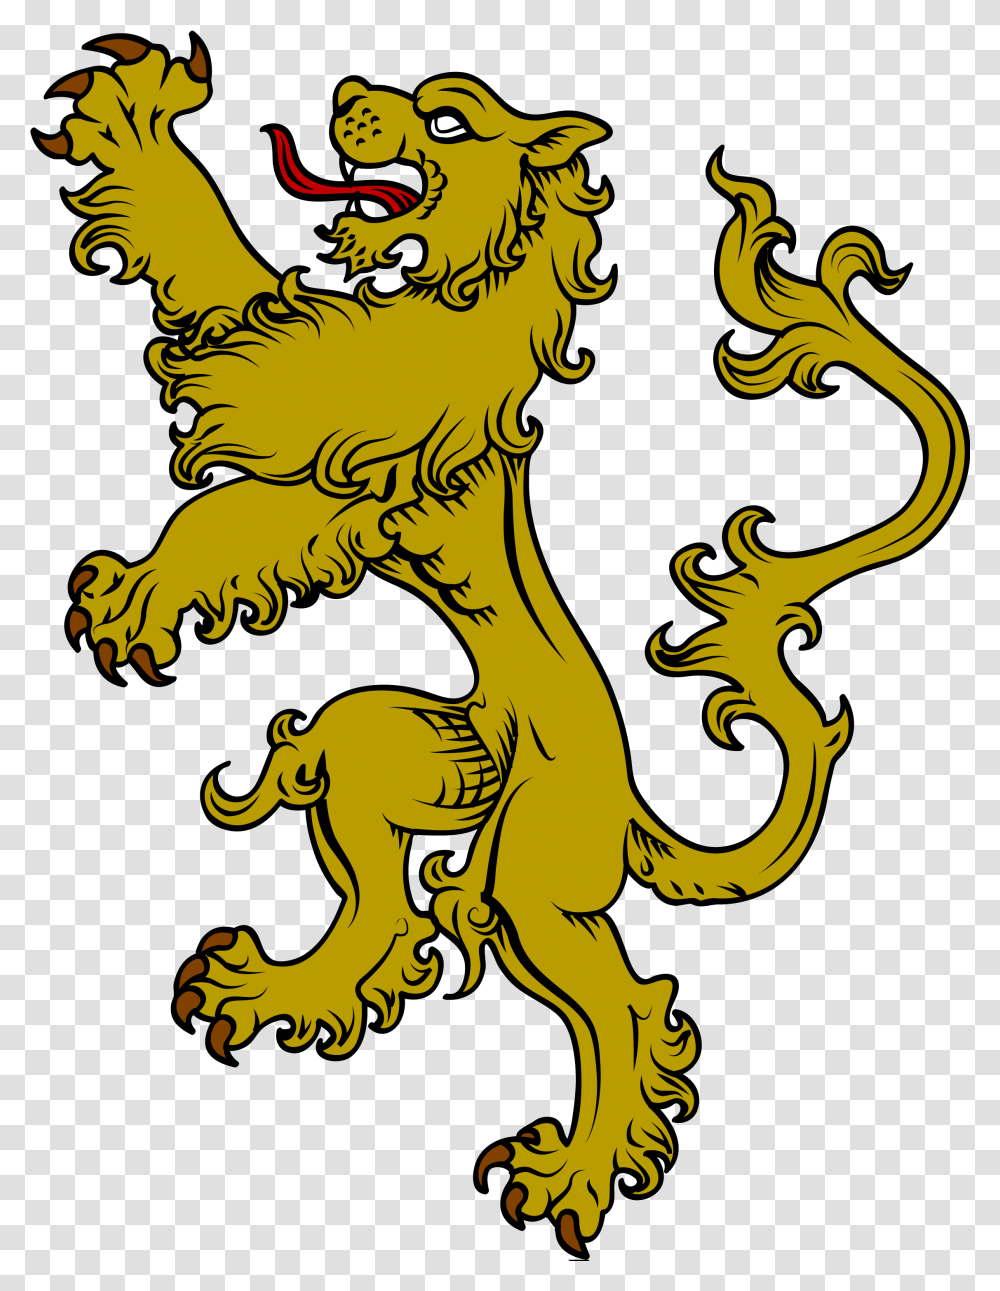 Coat Of Arms Lion Lion For Coat Of Arms, Dragon Transparent Png